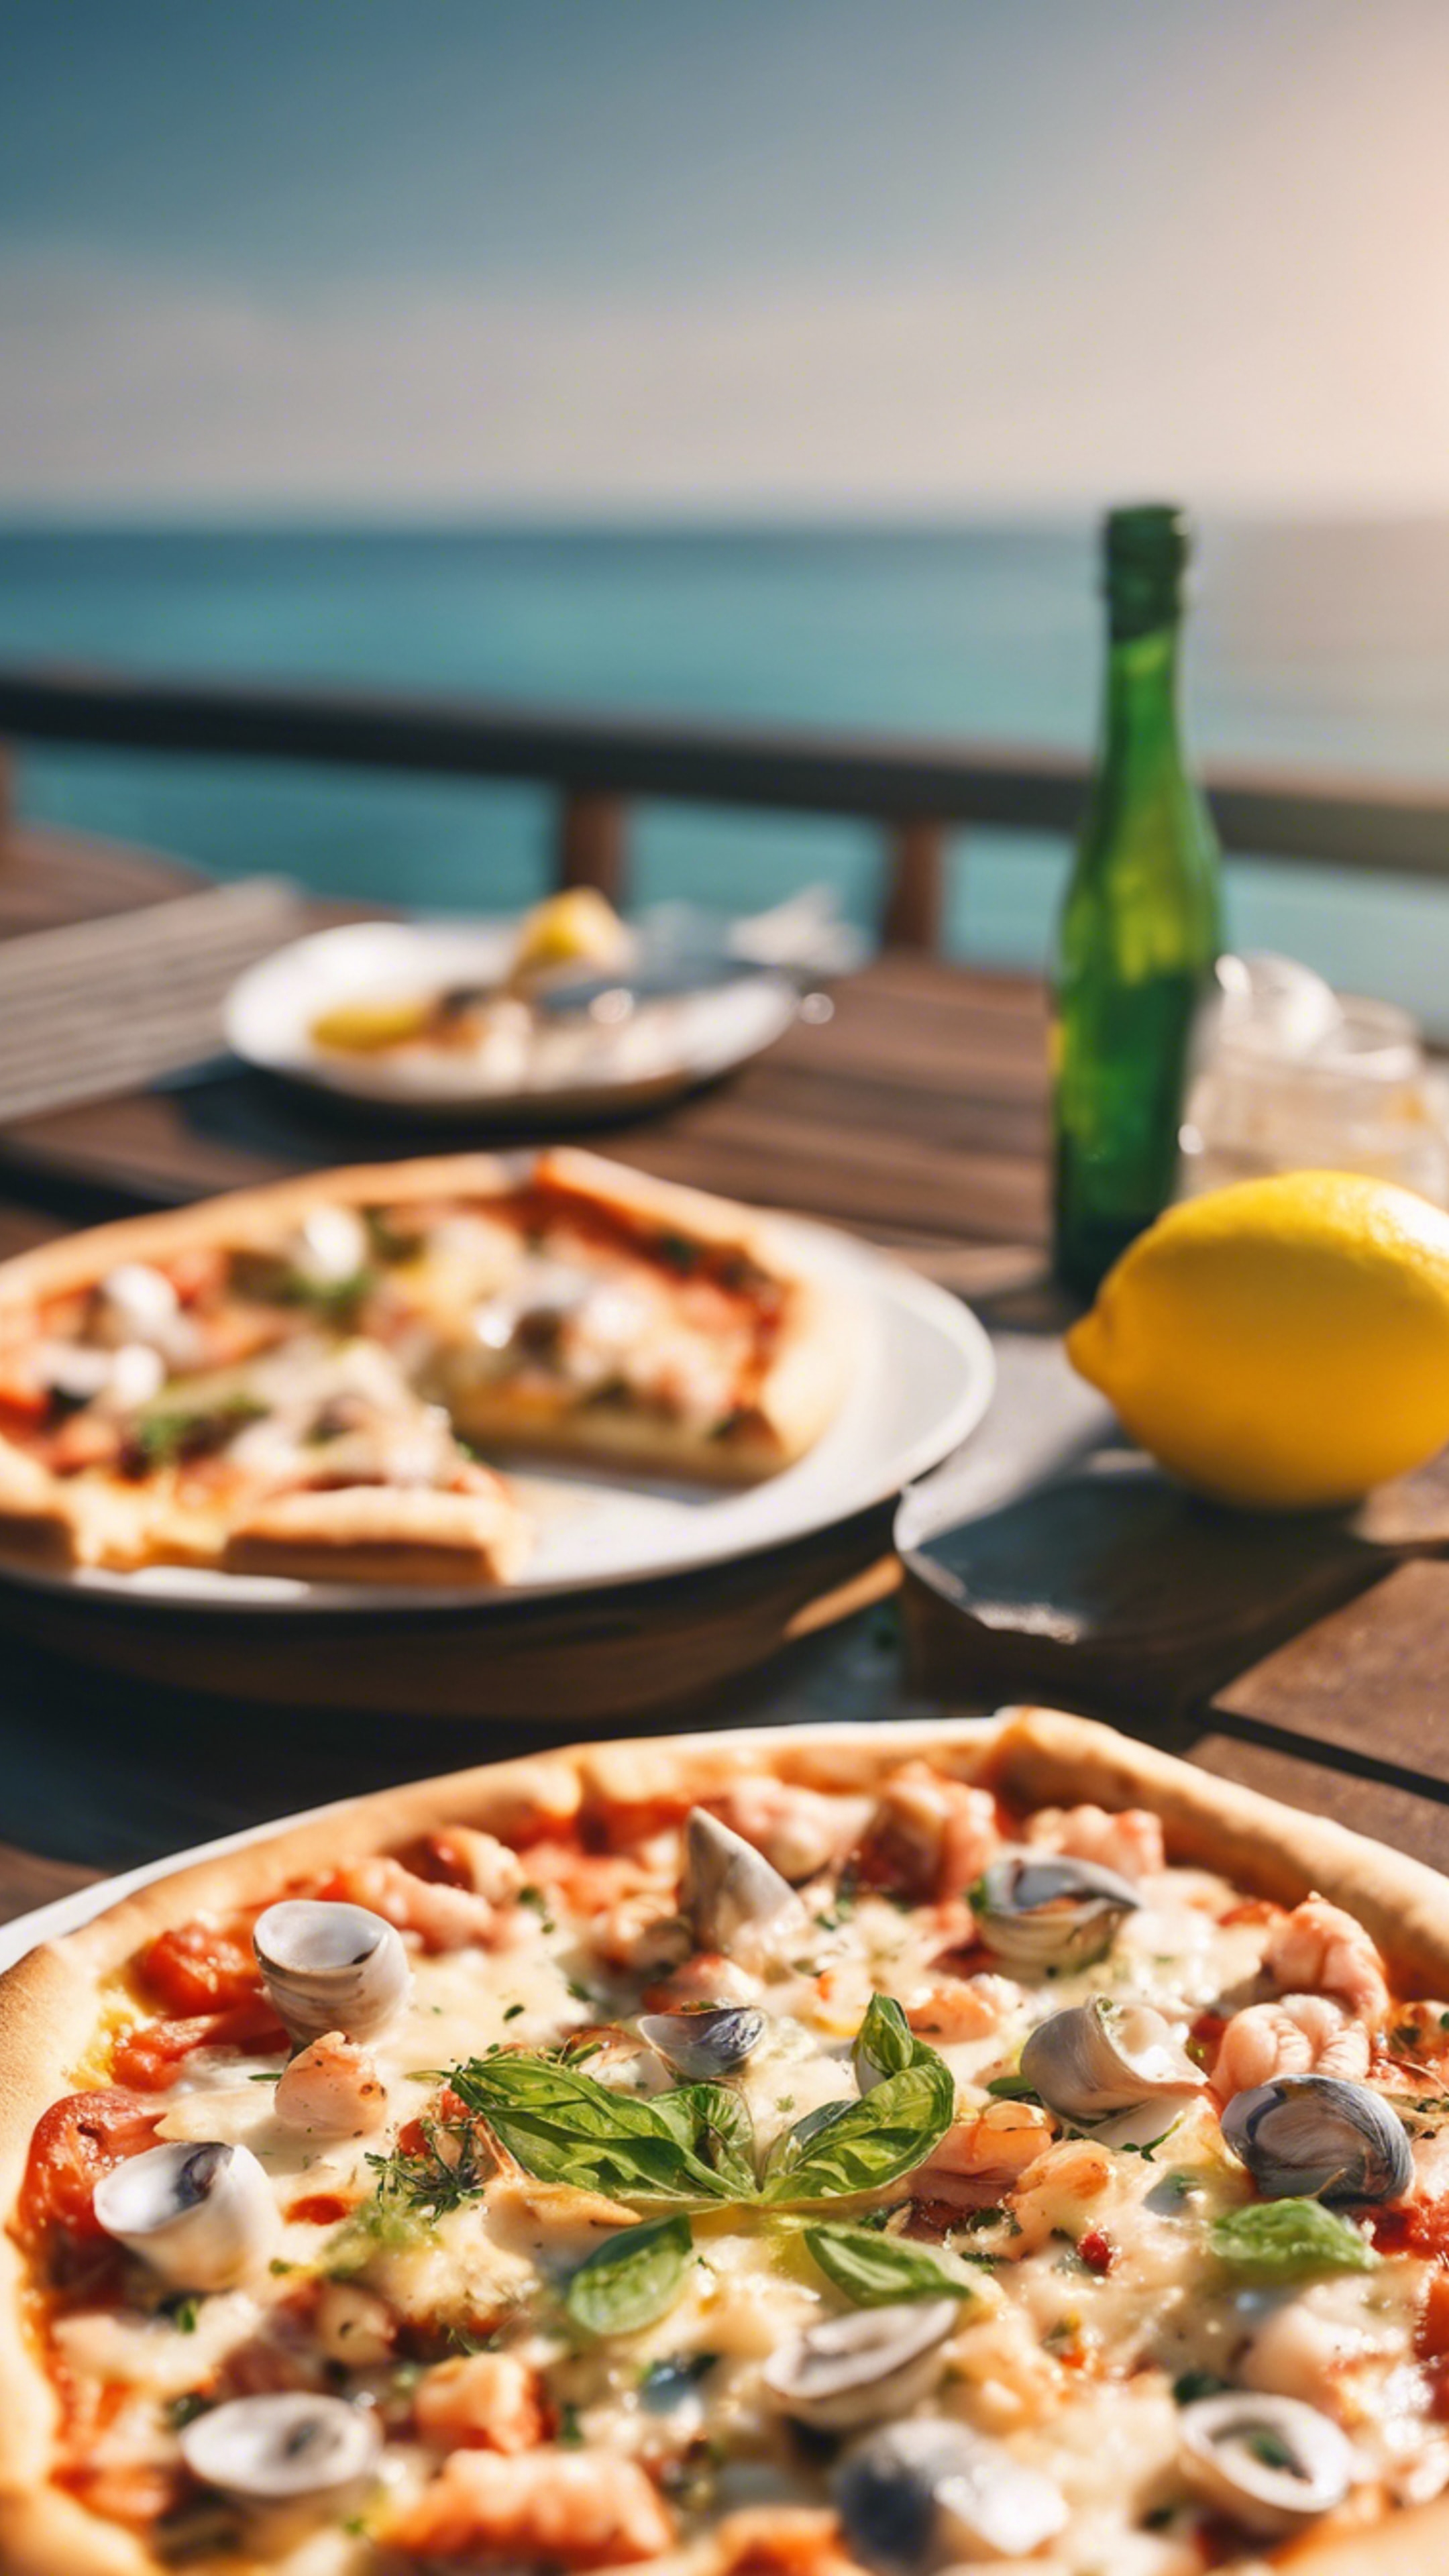 A zesty lemon and seafood pizza on a sunny seaside cafe table.壁紙[3a16046c2c4041a9a353]